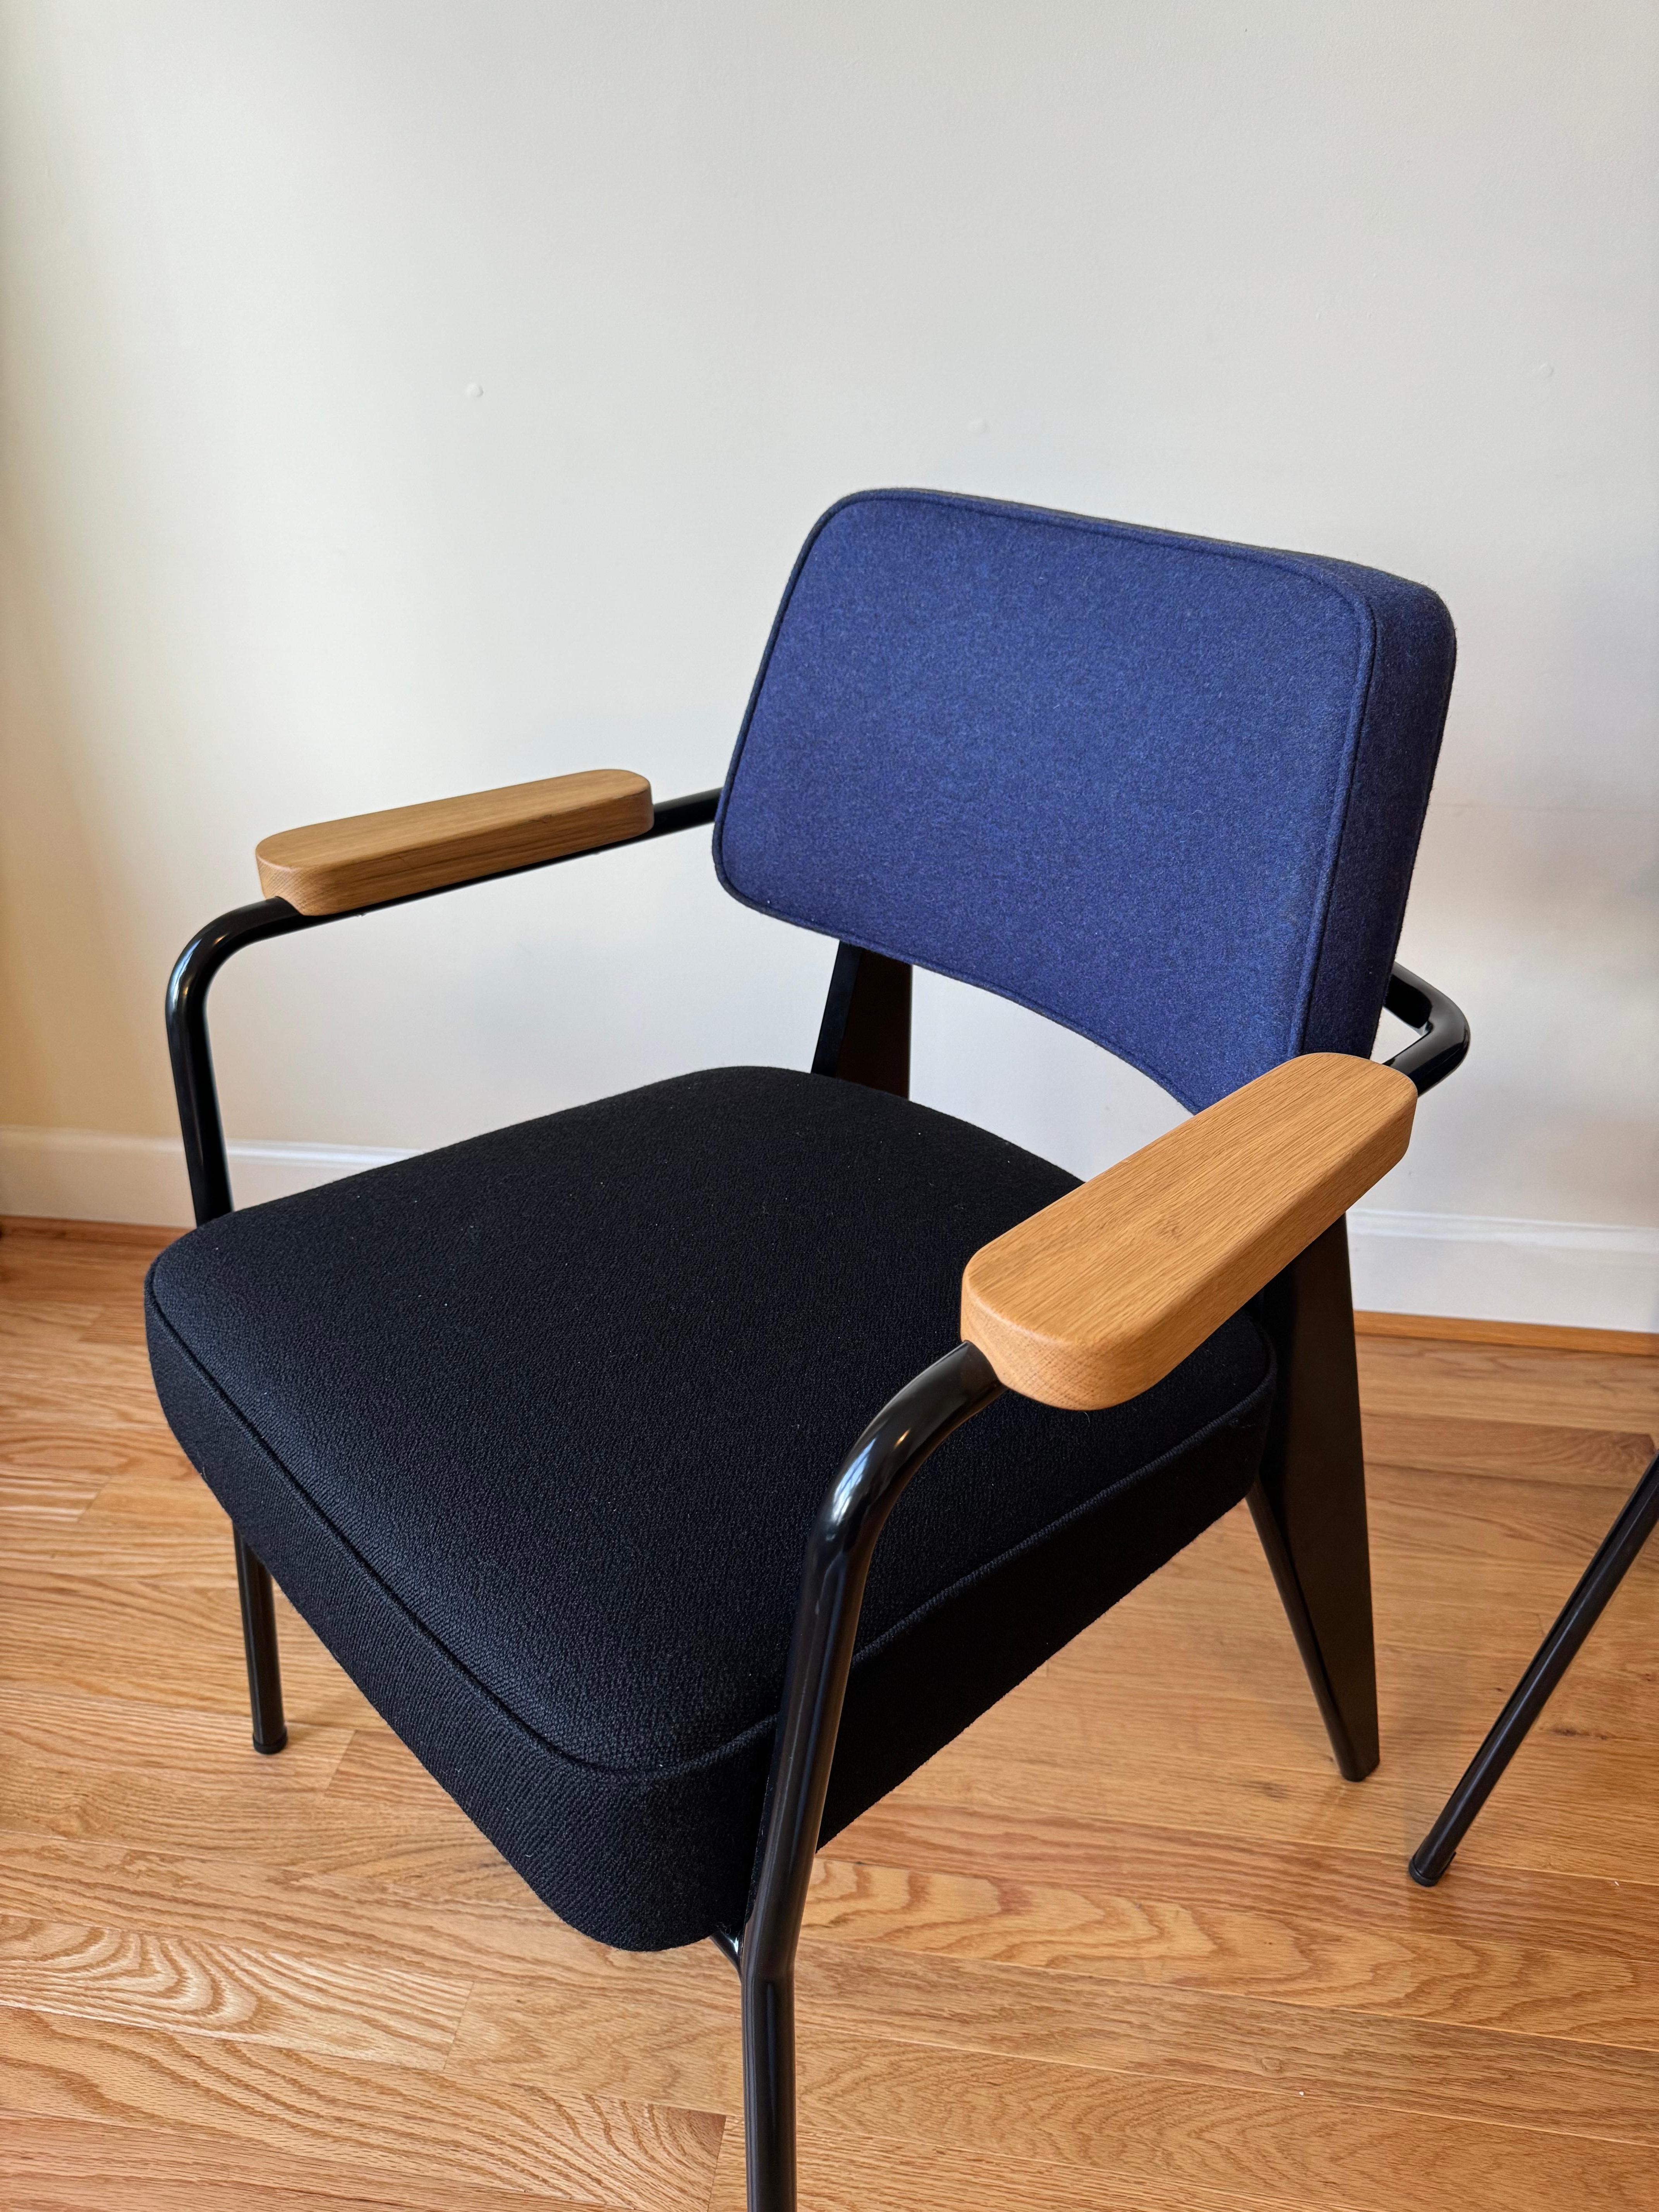 Mid-20th Century Fauteuil Direction by Jean Prouvé for VITRA  For Sale